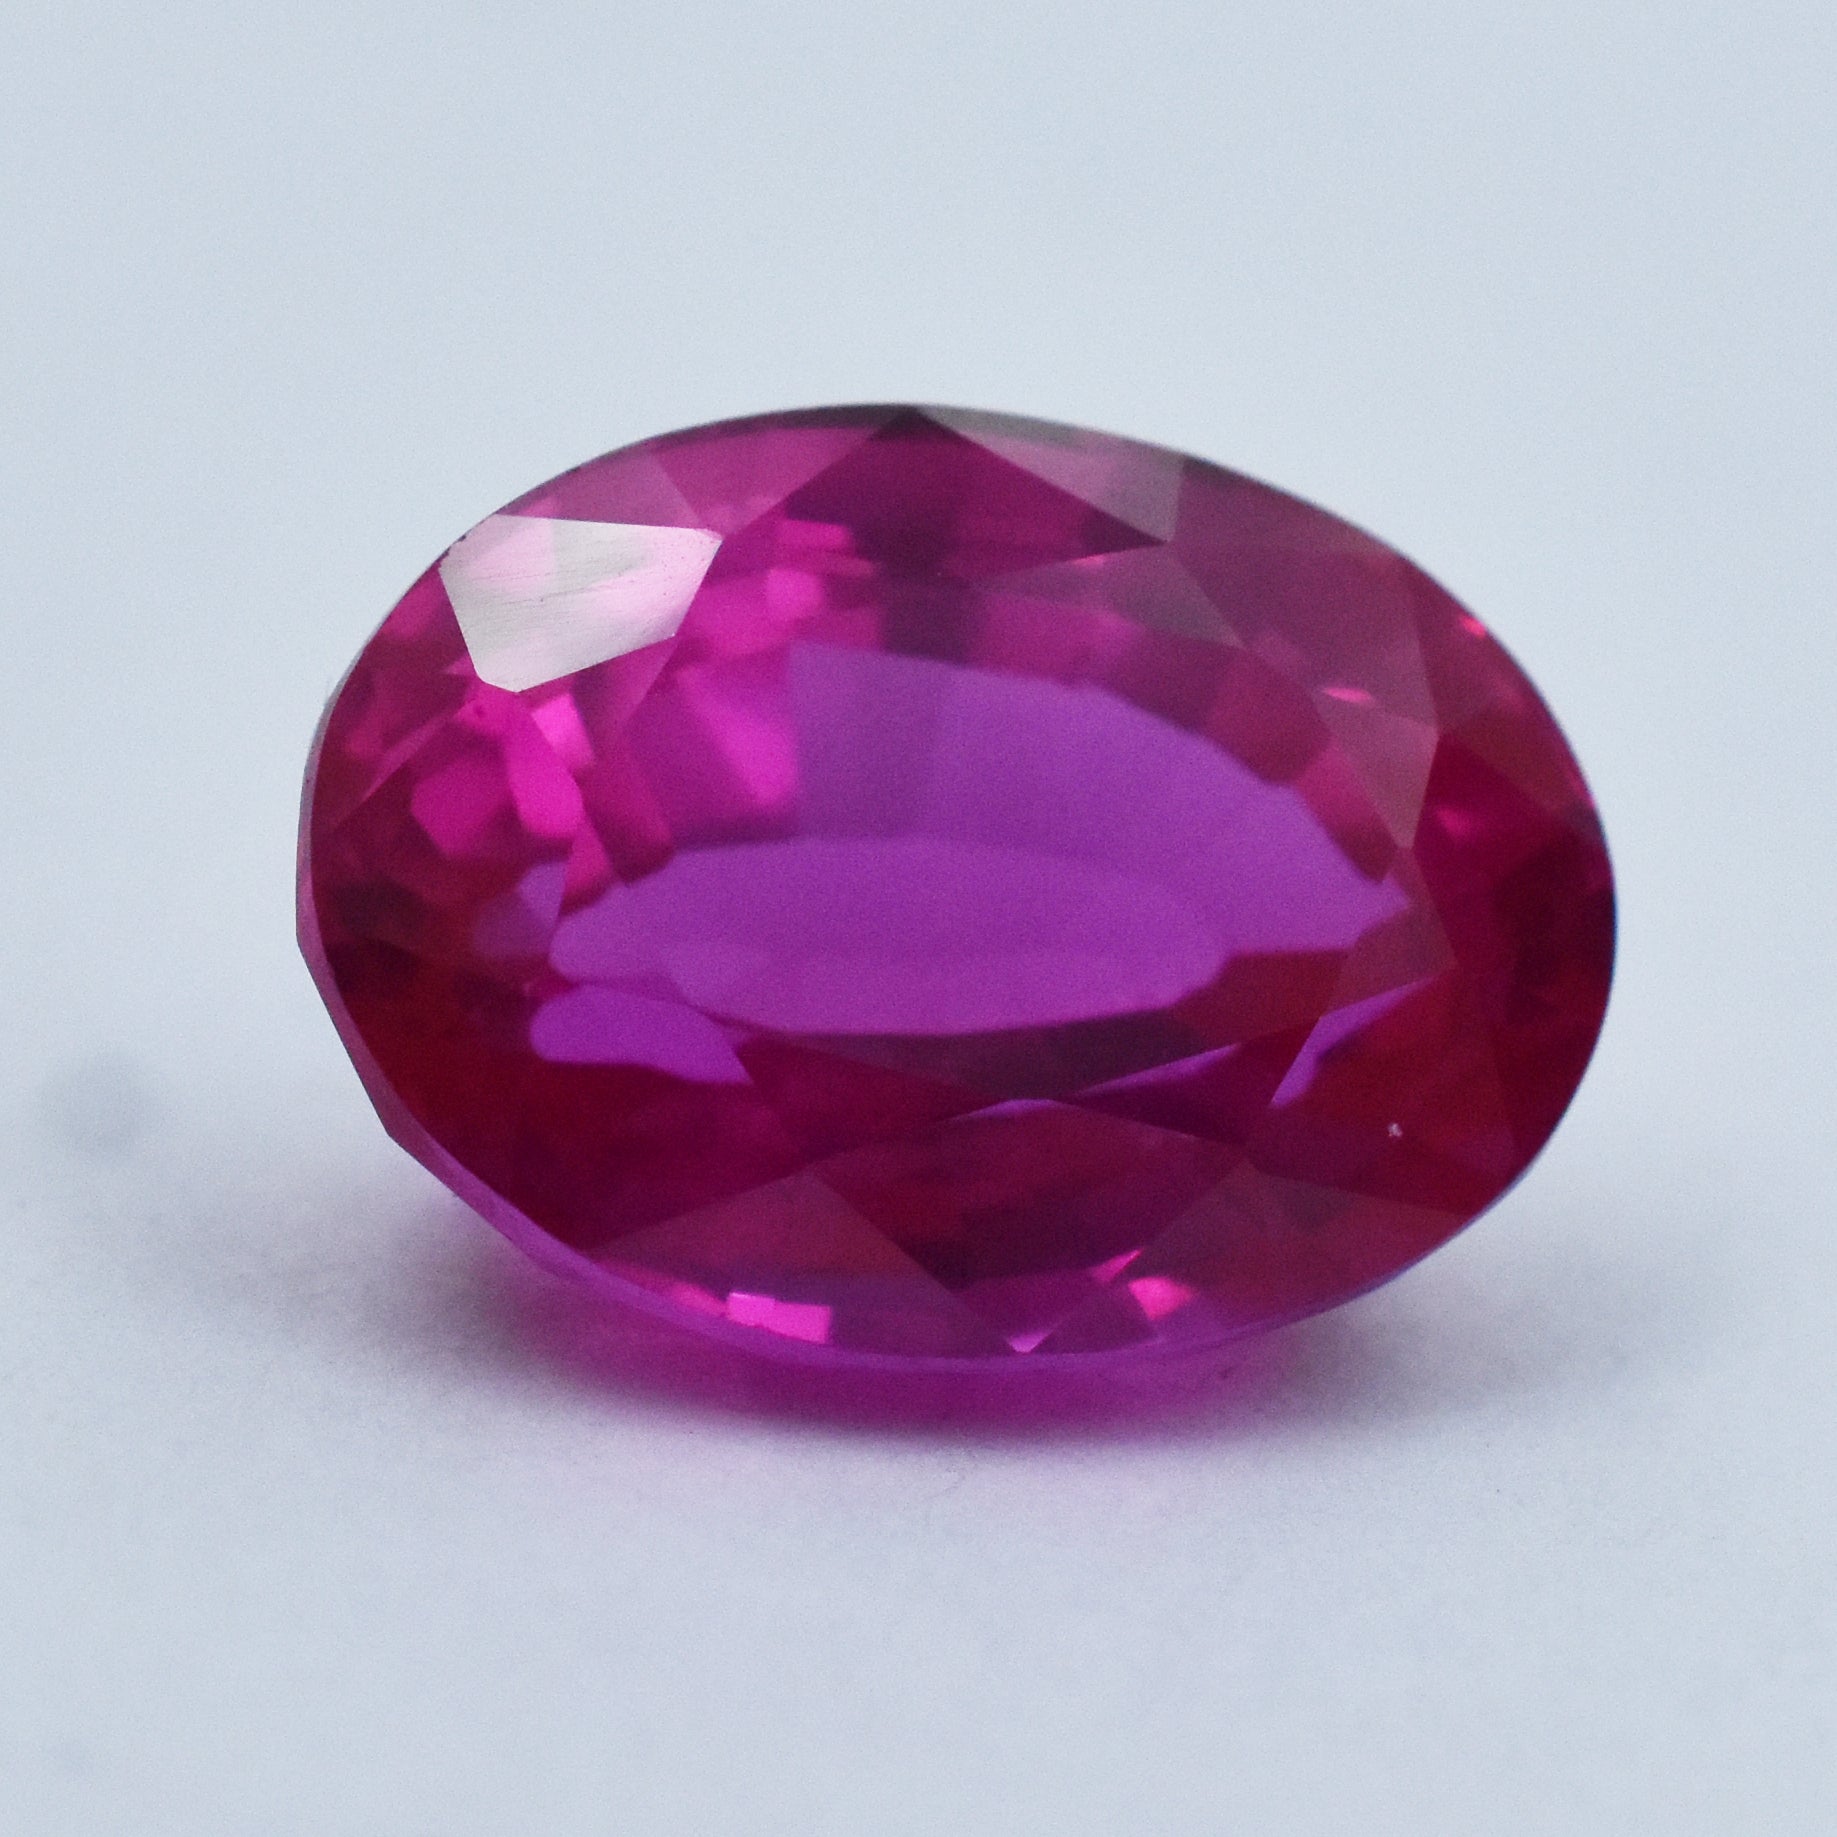 Certified Precious Rare Pink Ruby Flawless Loose Pink Ruby Gemstone Natural Pink Ruby Top Quality Pink Ruby Oval Shape 18.65 Ct Ruby